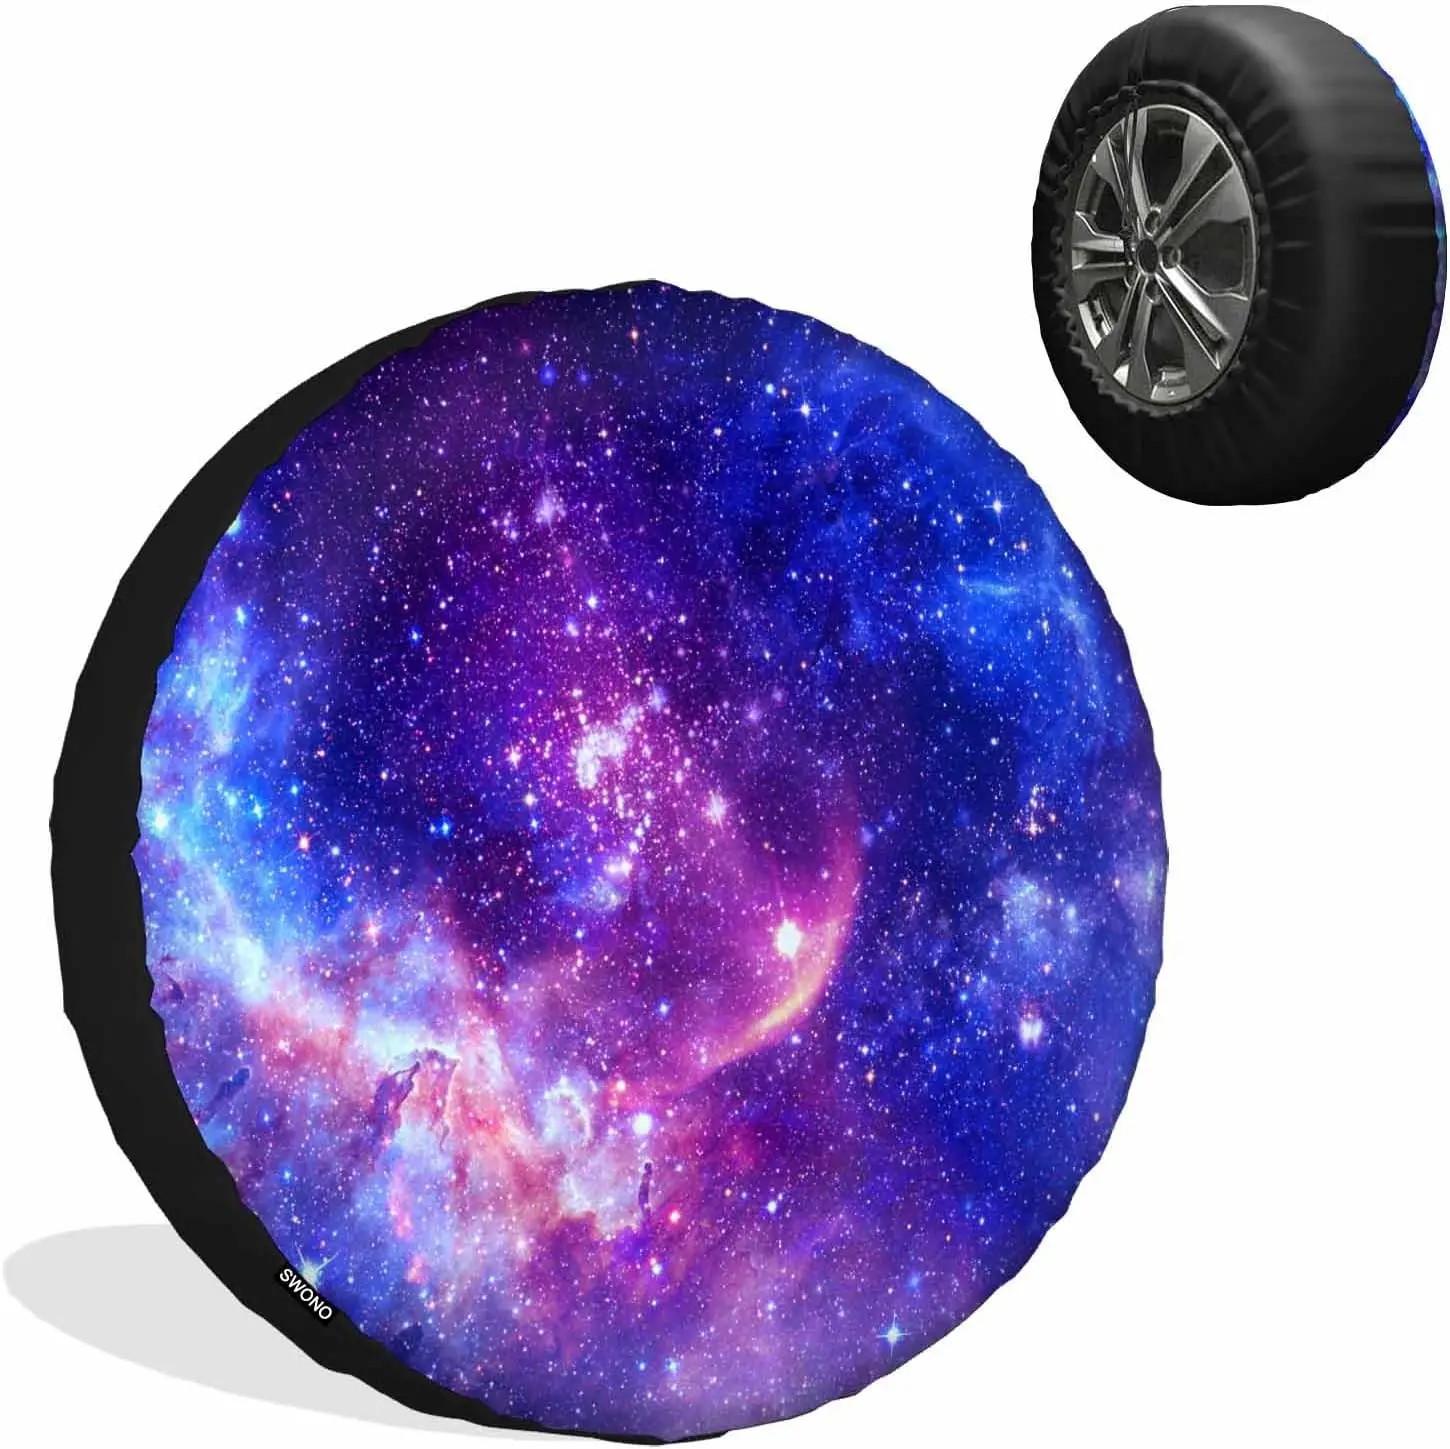 

Spare Tire Covers Wheel Guards Weatherproof Camping Trailer Universal Fits Tires for Trailer Rv SUV Truck Camper Travel Trailer